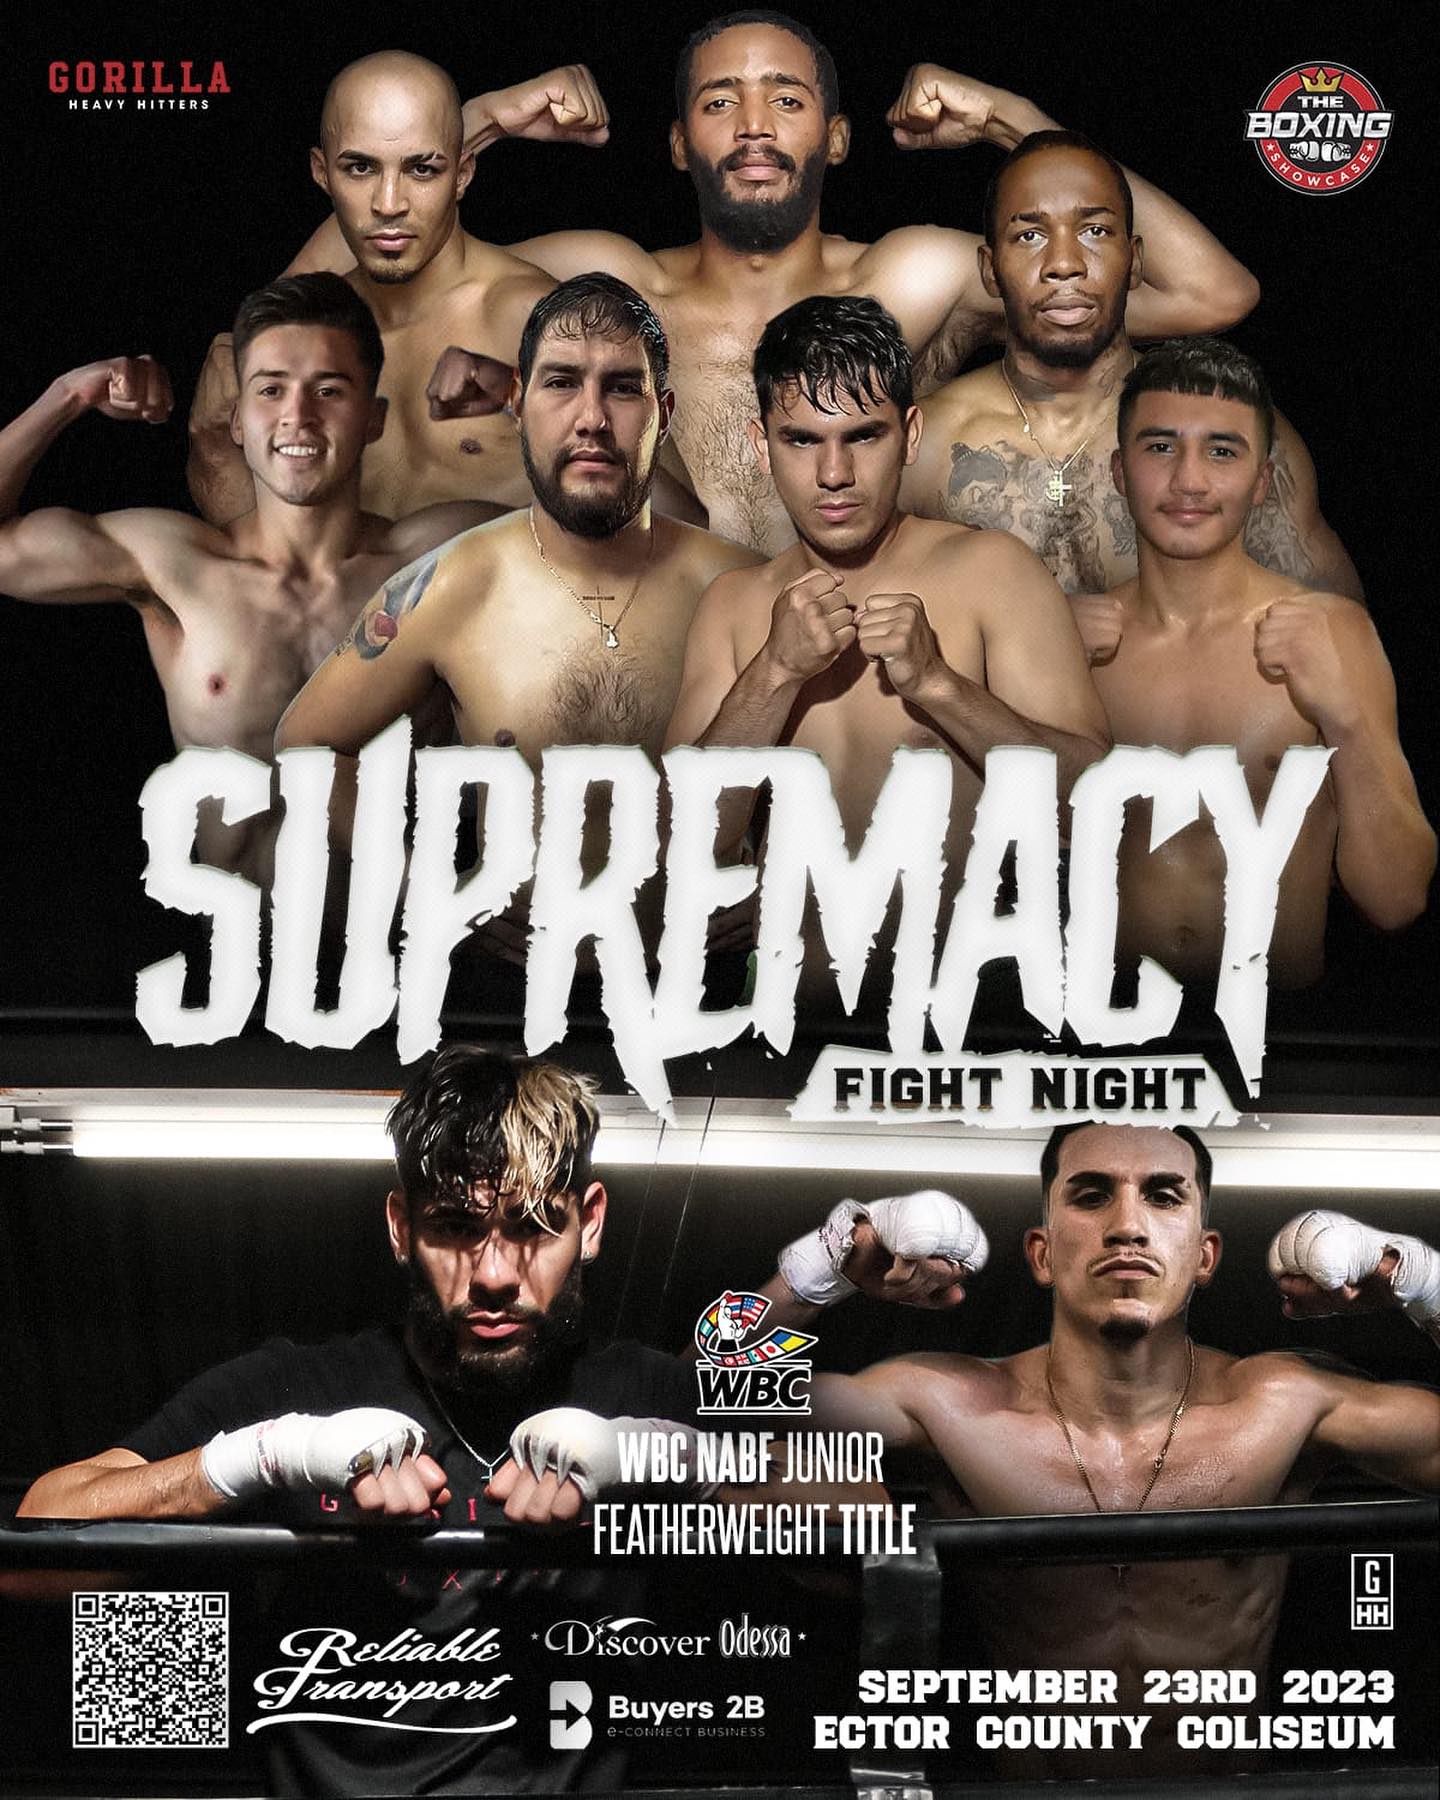 Supremecy Boxing Night at the Ector County Coliseum